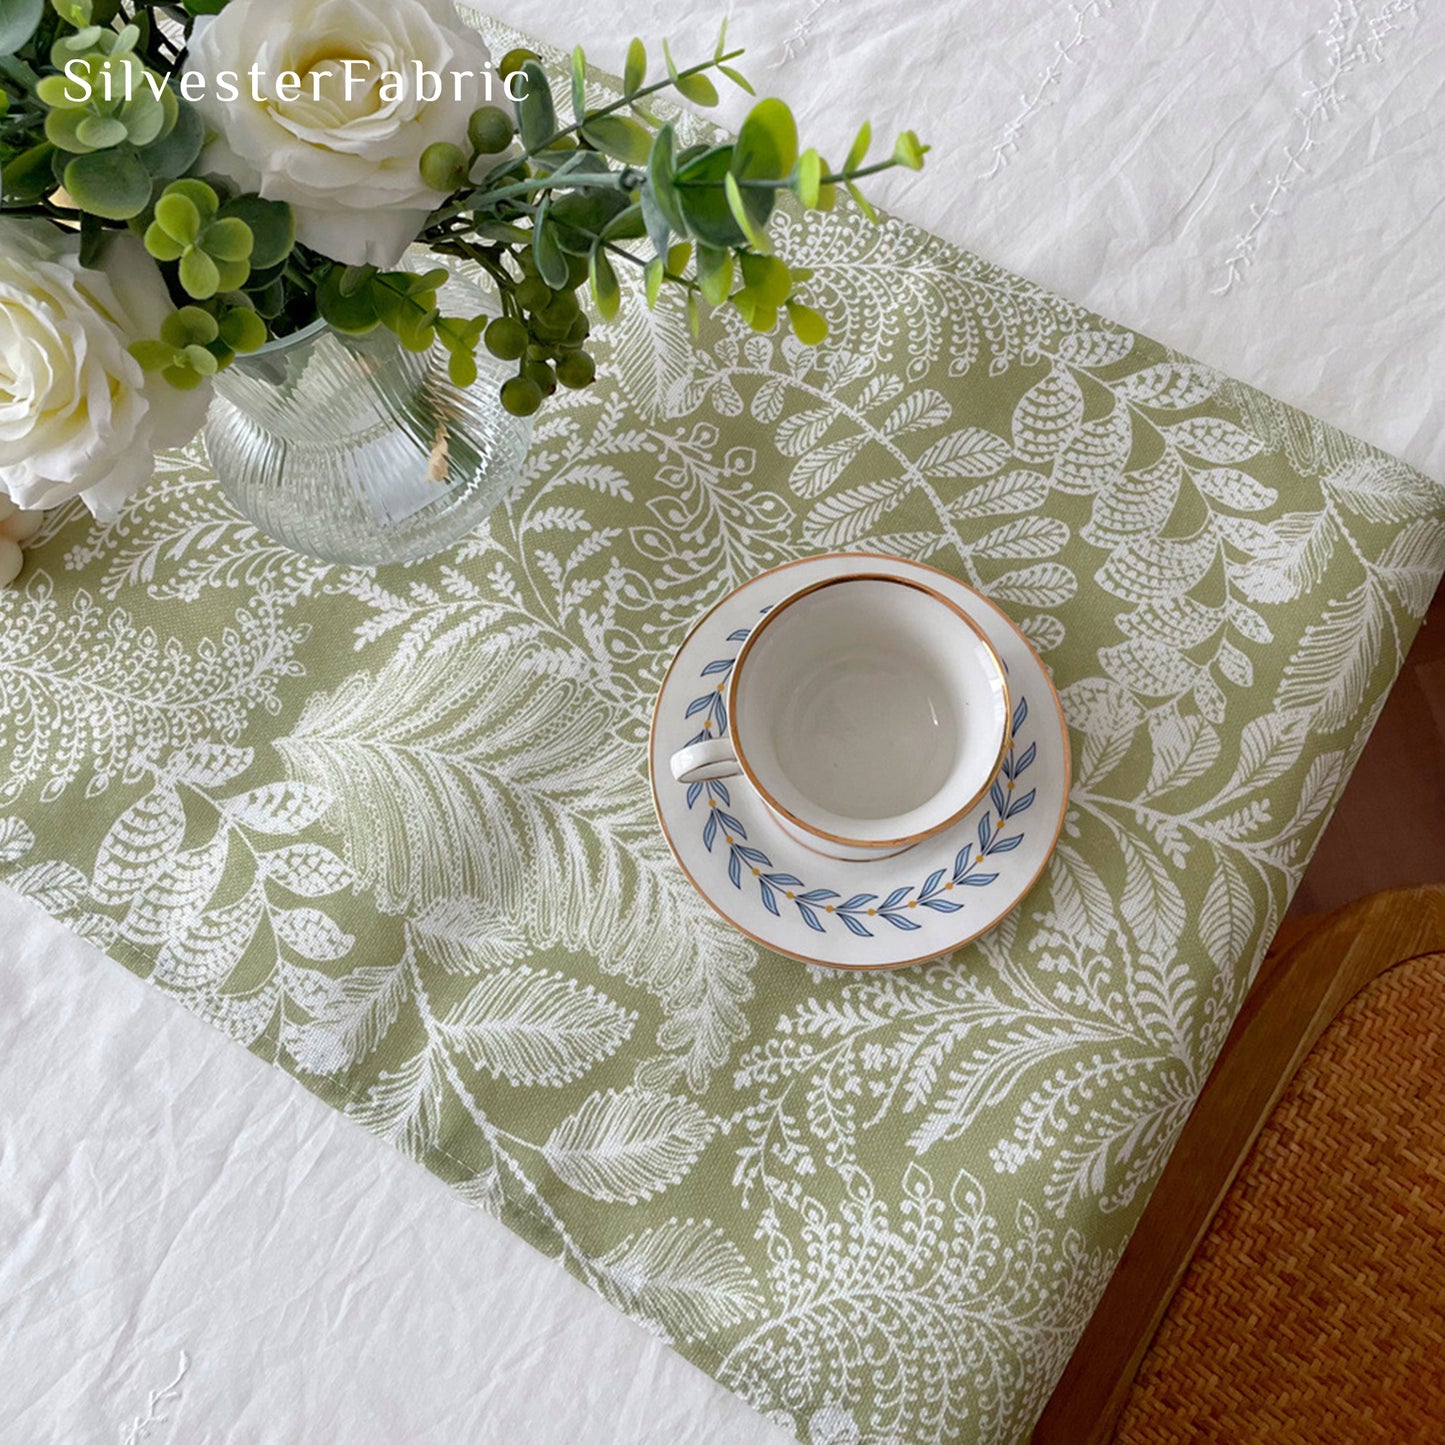 Spring Table Runner丨Free Shipping - Silvester Fabric